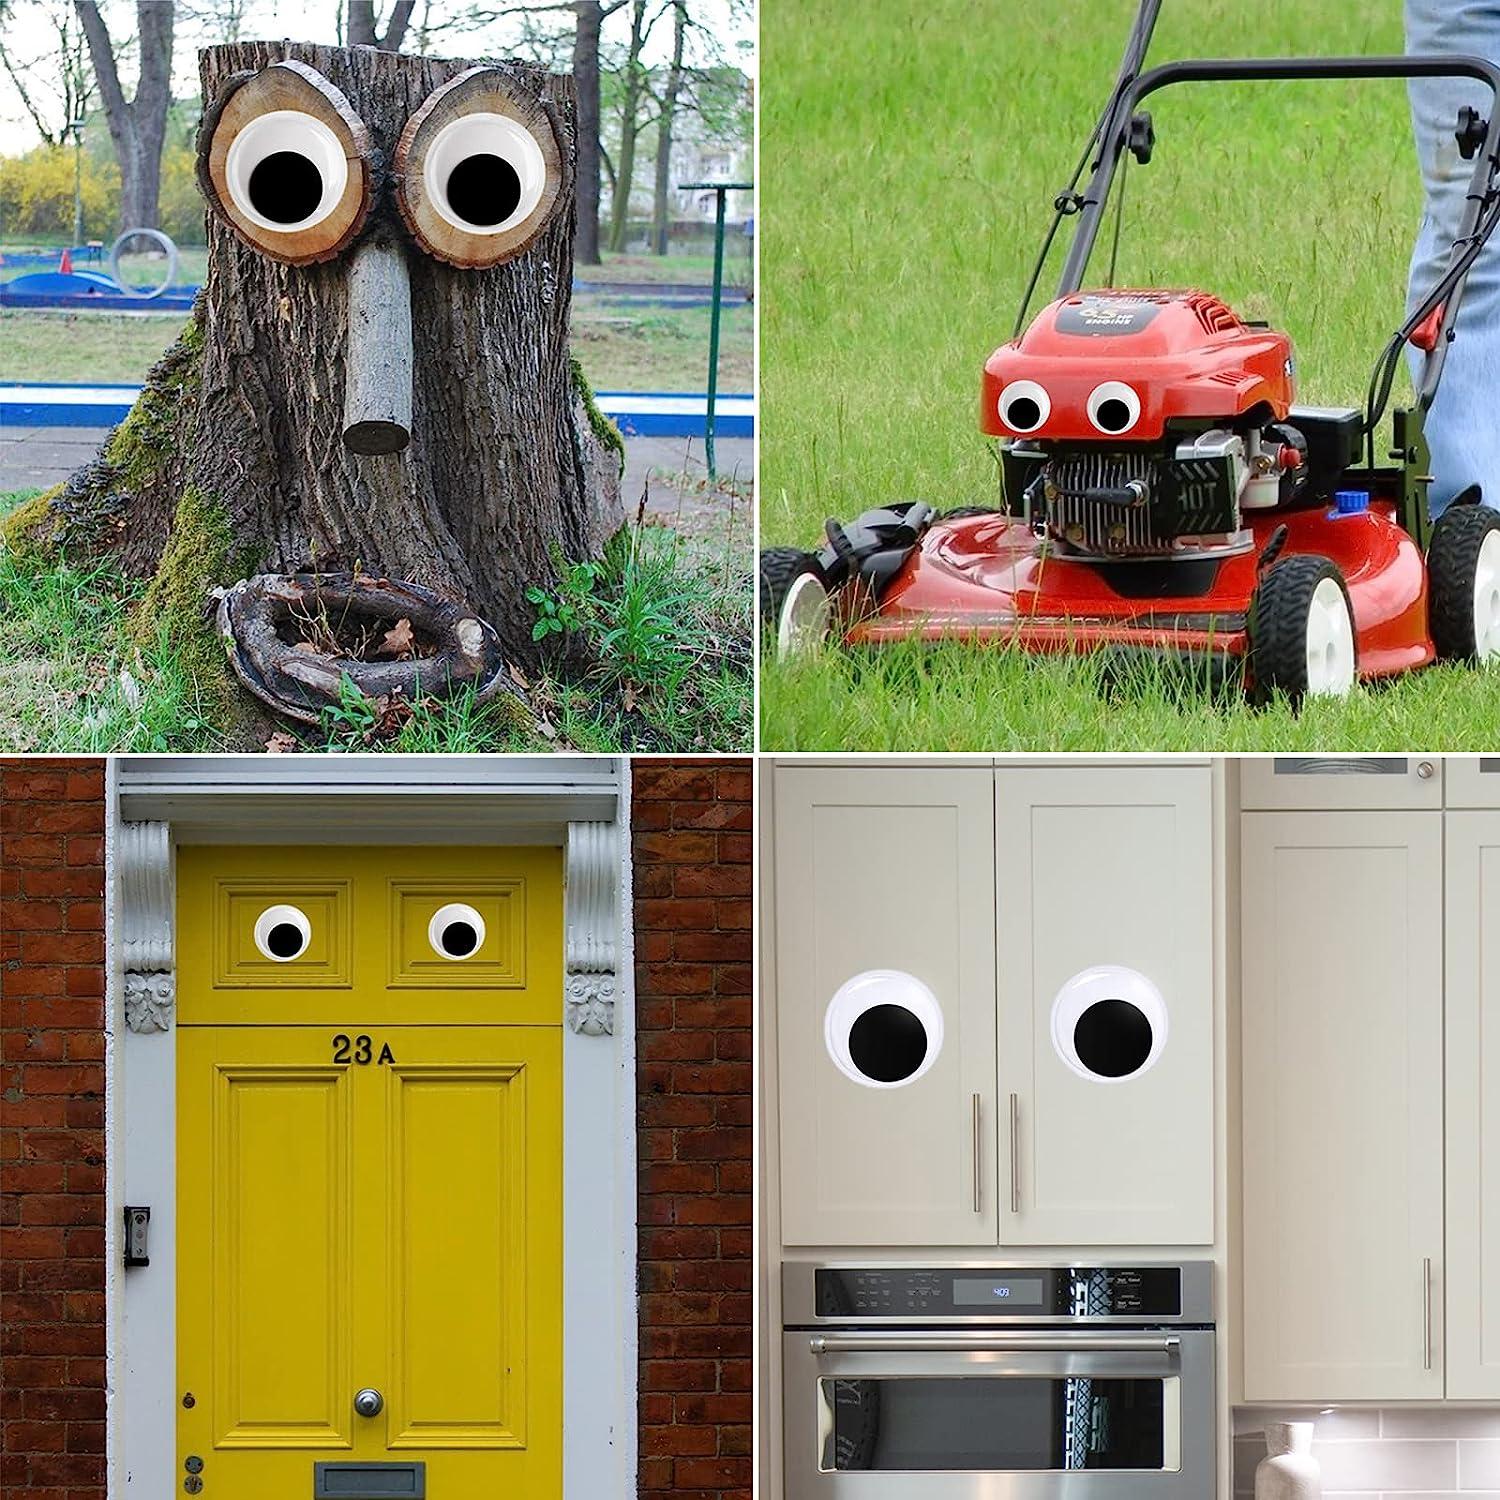 Accoutrements Big Googly Eyes - Big Googly Eyes . shop for